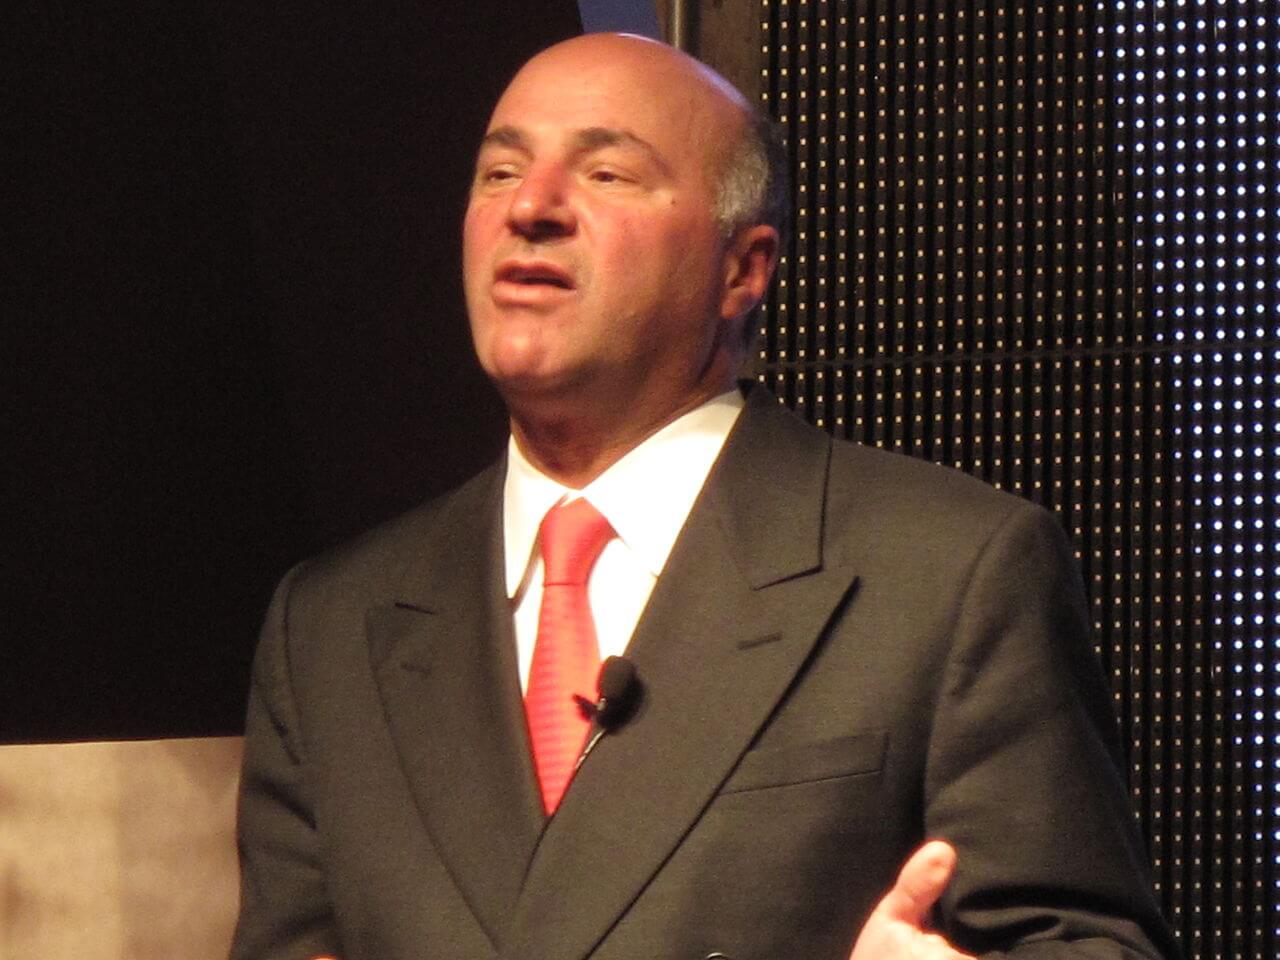 Montreal's Kevin O'leary